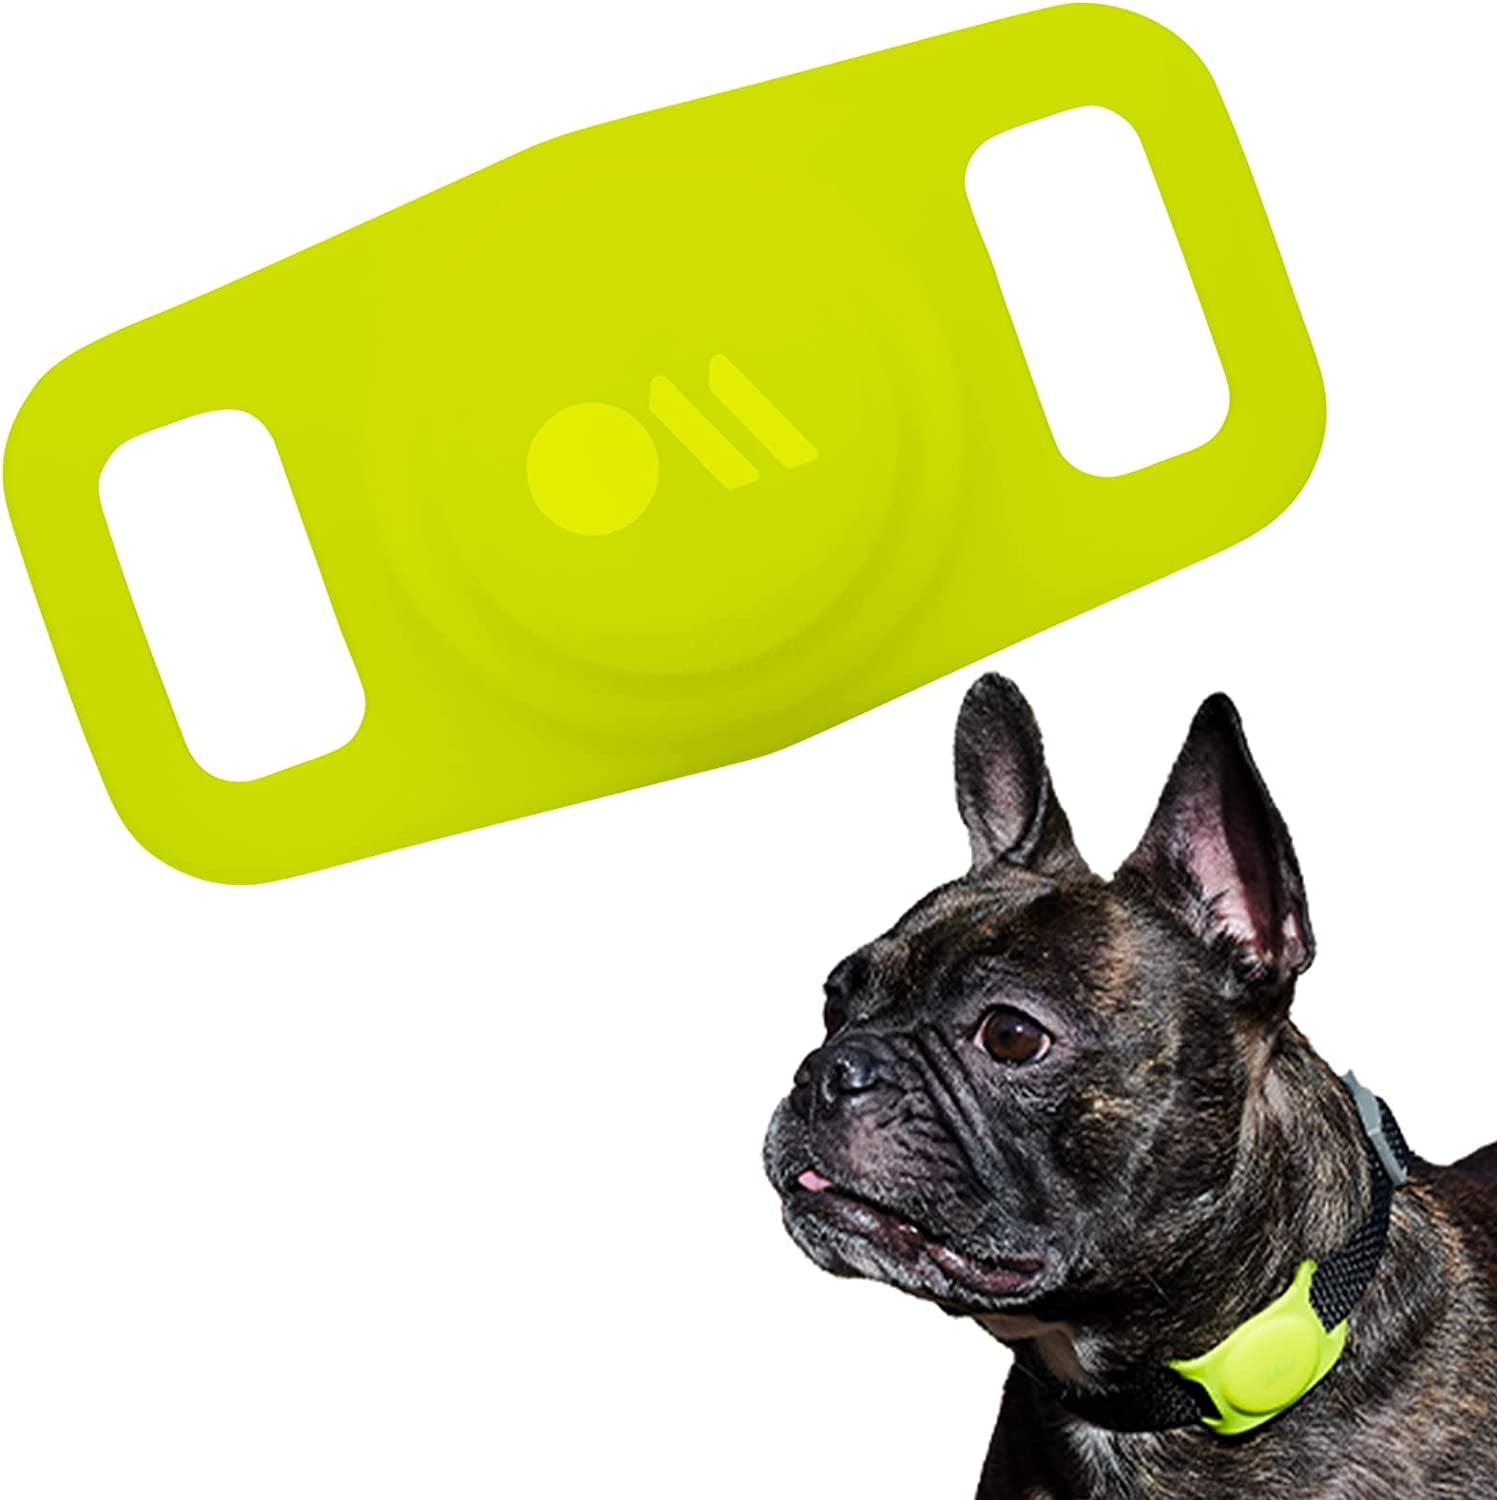 Case-Mate Protective Airtag Case for Dog Collar, Anti-Lost Airtag Loop for Dog GPS Tracker, Airtag Case Compatible with Cat/Dog Collar, (Black) Electronics > GPS Accessories > GPS Cases Case-Mate Lime Green  